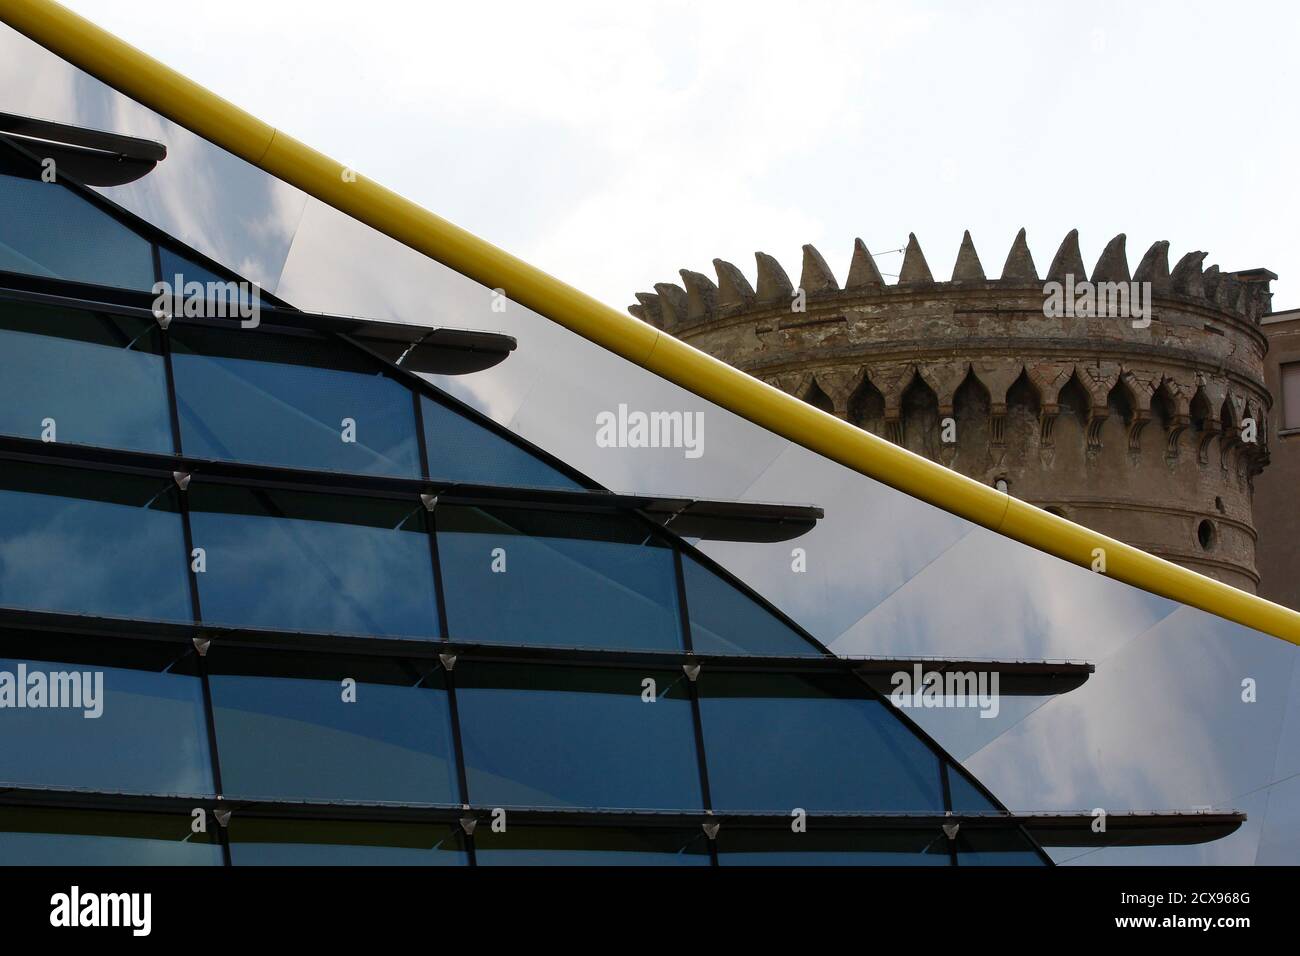 A view shows the exterior of the Casa Enzo Ferrari museum during a media preview in Modena, northern Italy, March 9, 2012. The museum honours the life and work of Enzo Ferrari, the founder of the Italian sports car manufacturer, and will officially open on Saturday. REUTERS/Alessandro Bianchi (ITALY - Tags: ENTERTAINMENT SPORT MOTORSPORT TRANSPORT SOCIETY) Stock Photo